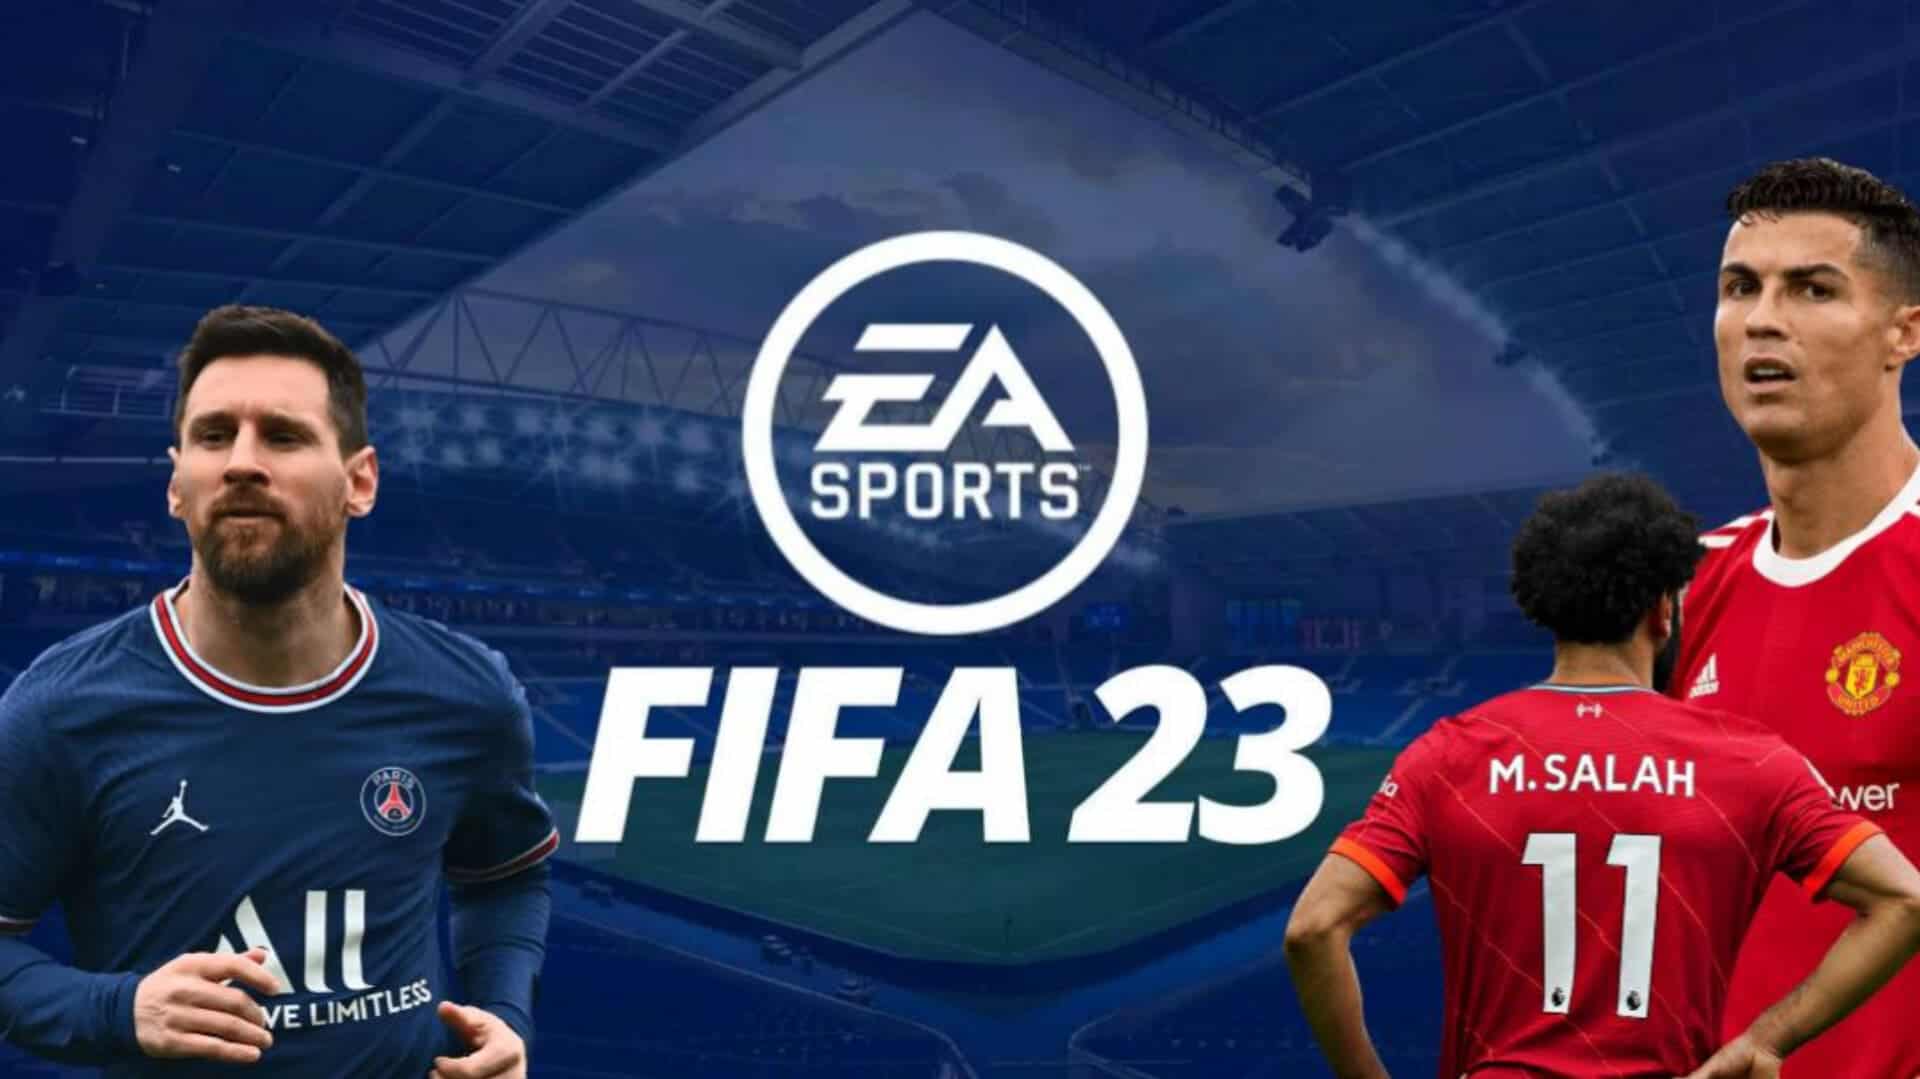 Fifa: the video game that changed football, Games